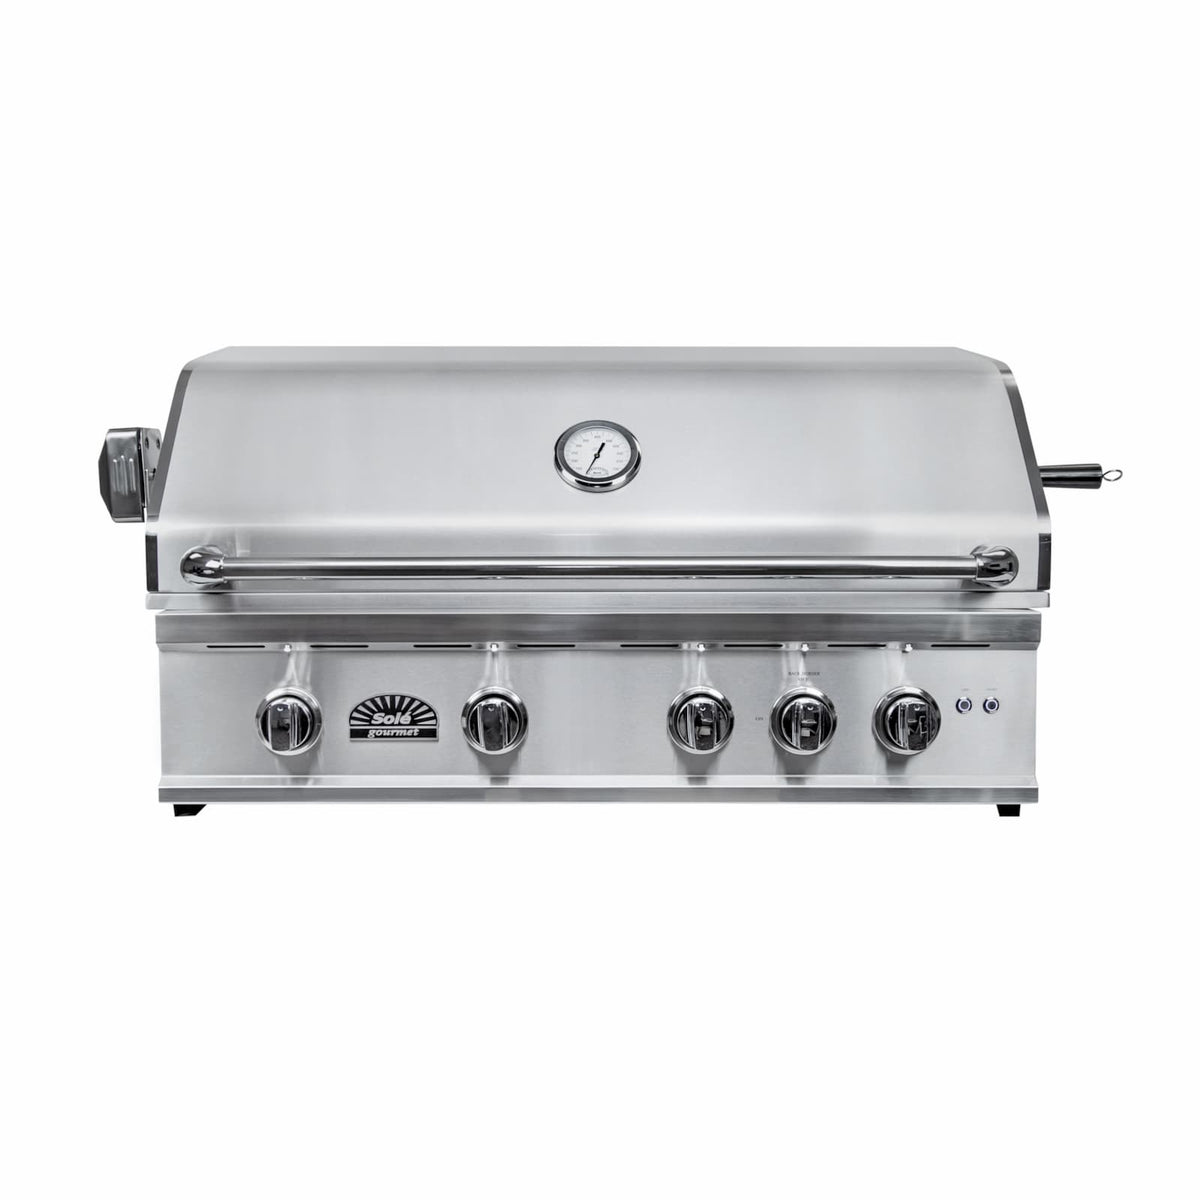 Sole Gourmet TR Series Built-in Gas Grill with LED Controls